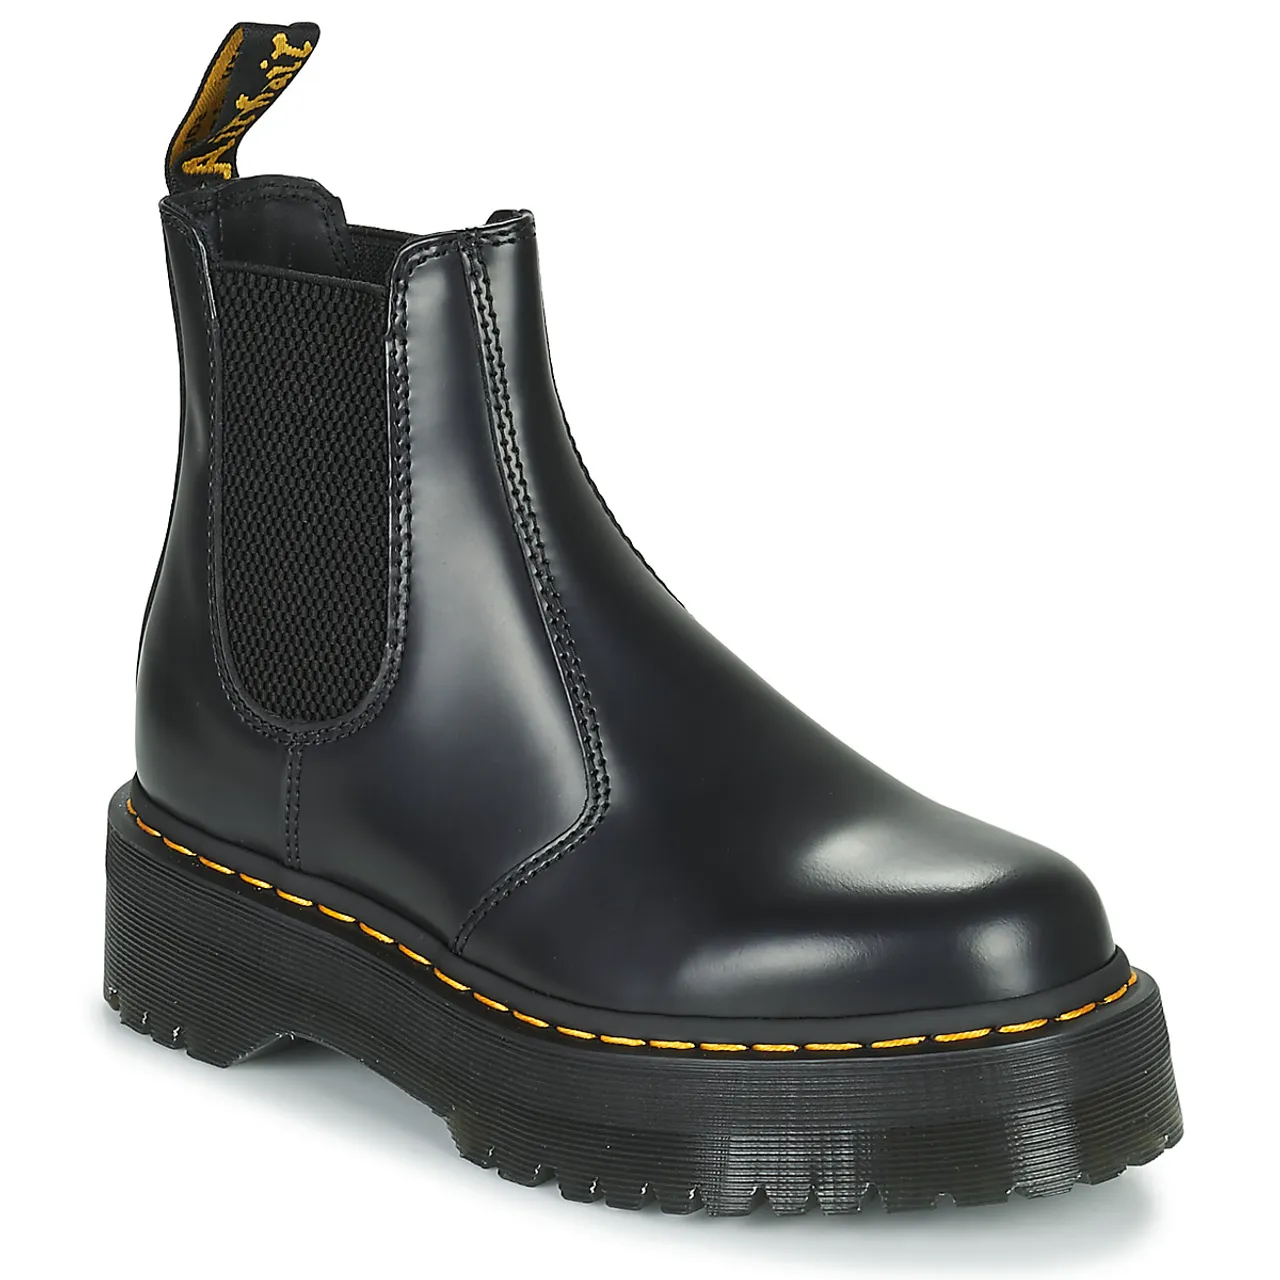 Dr. Martens  2976 Quad Polished Smooth  women's Mid Boots in Black